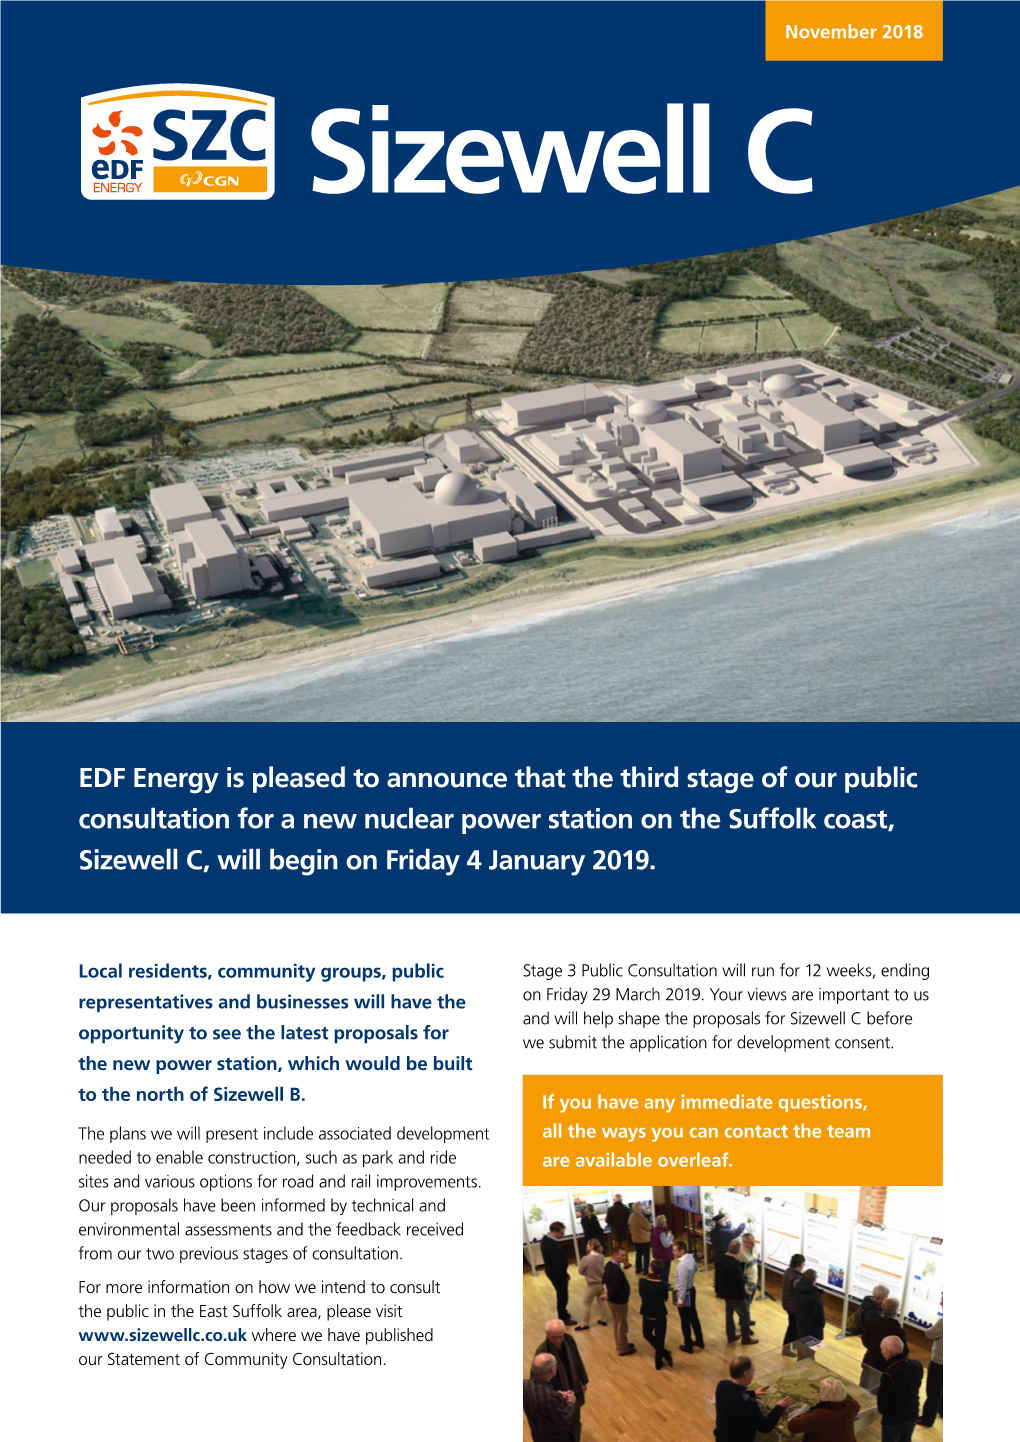 EDF Energy Is Pleased to Announce That the Third Stage of Our Public Consultation for a New Nuclear Power Station on the Suffolk